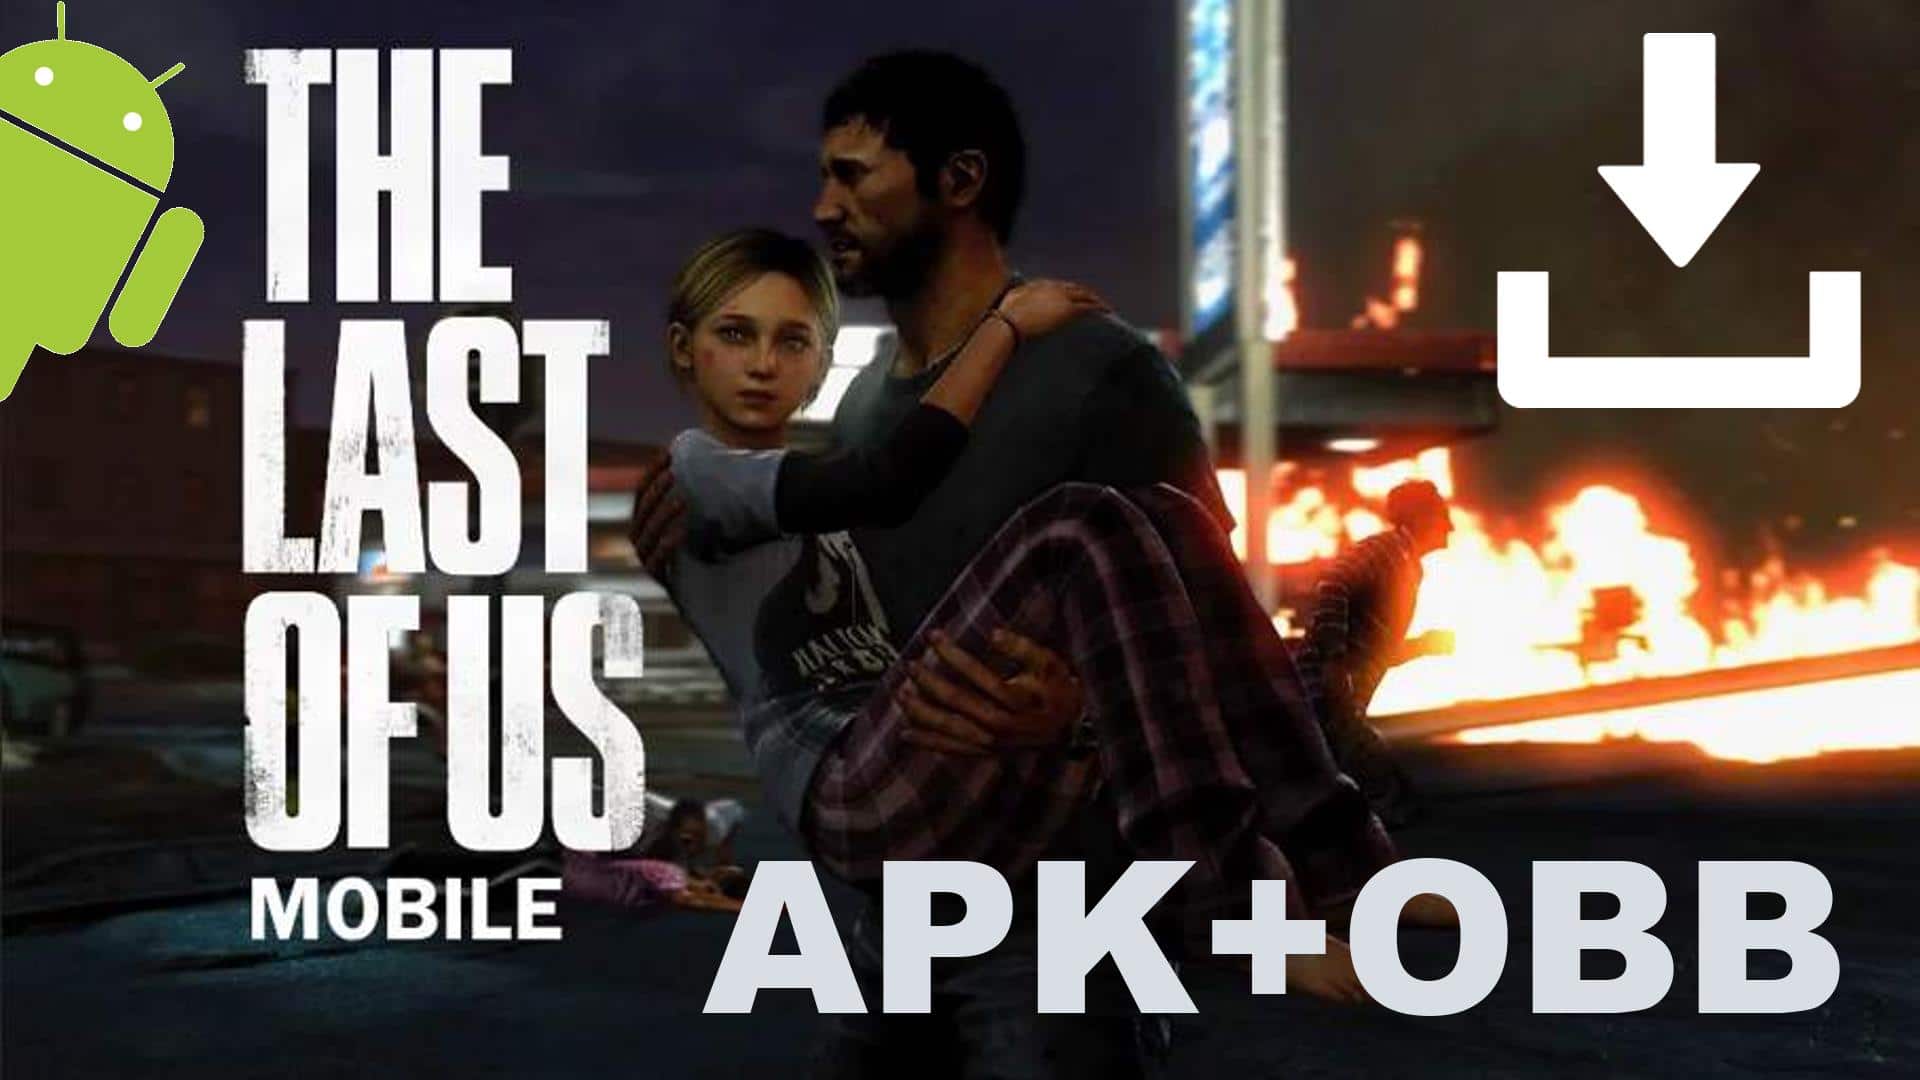 The Last of Us Android Apk+Obb Download